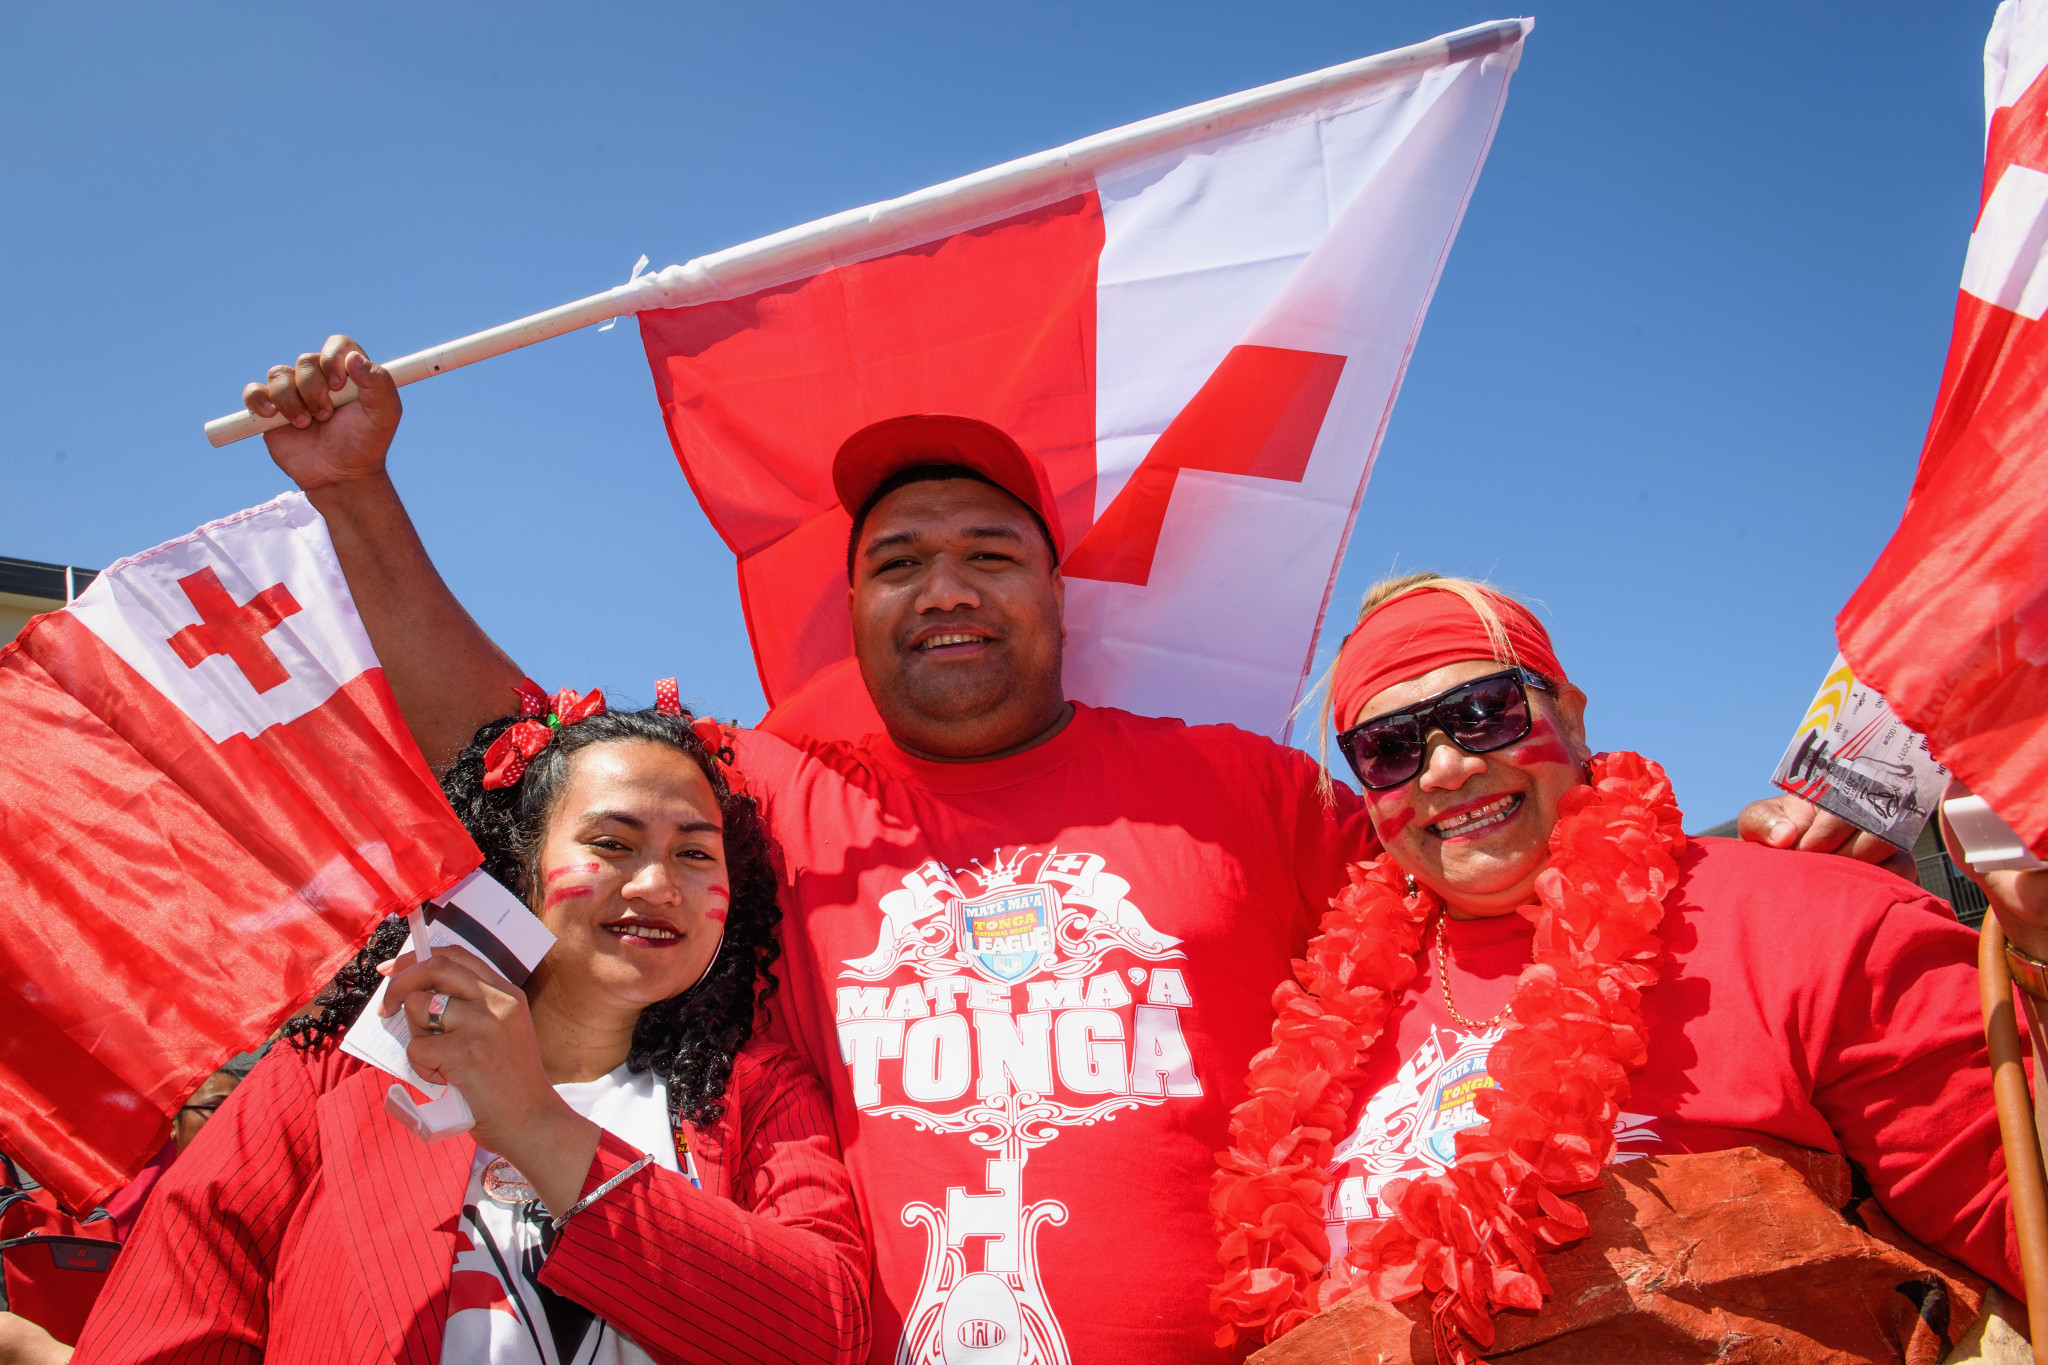 Optimism over overseas fans for Rugby League World Cup 2021 in England